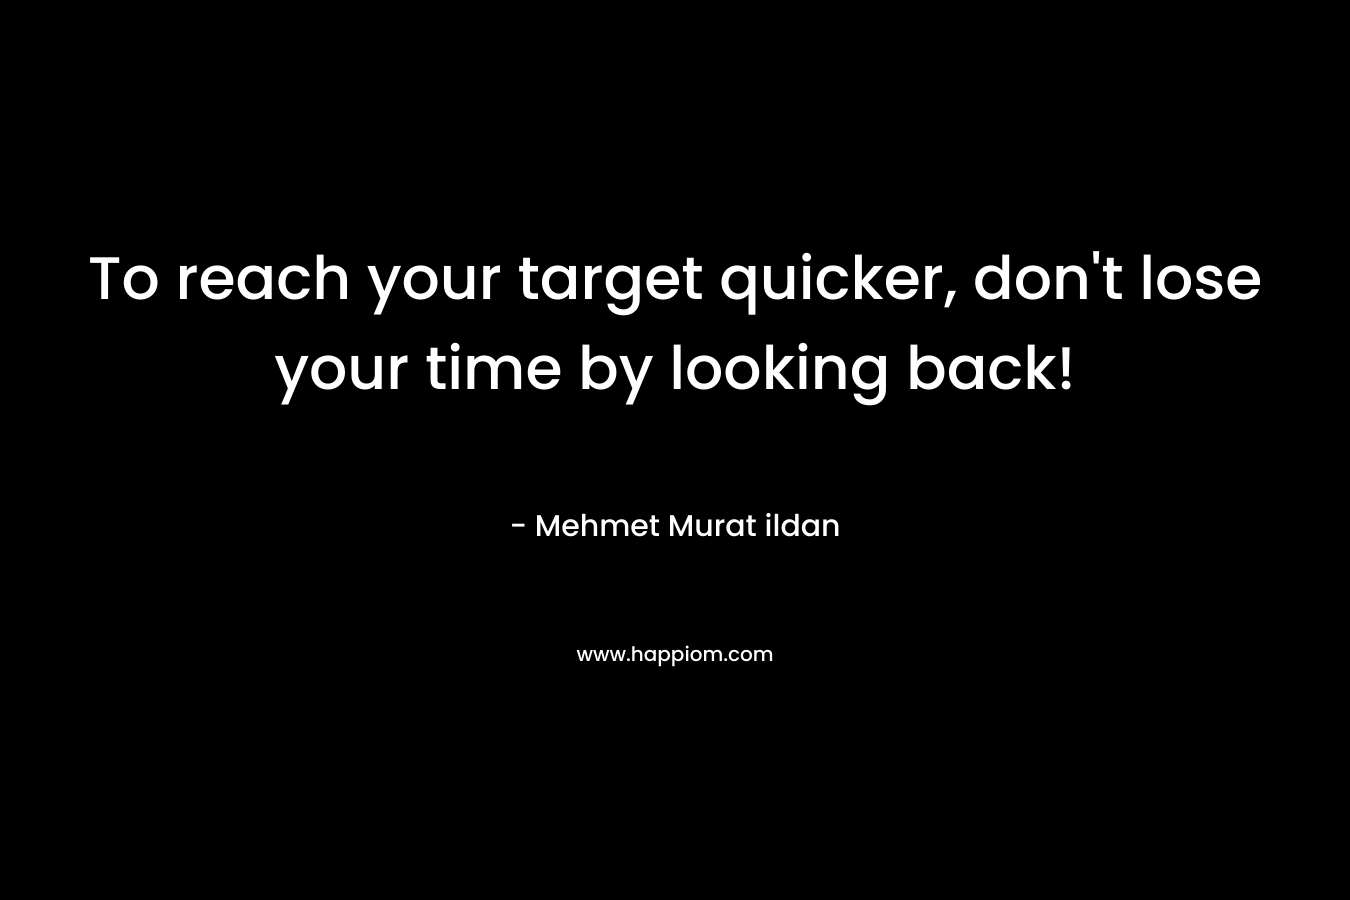 To reach your target quicker, don't lose your time by looking back!